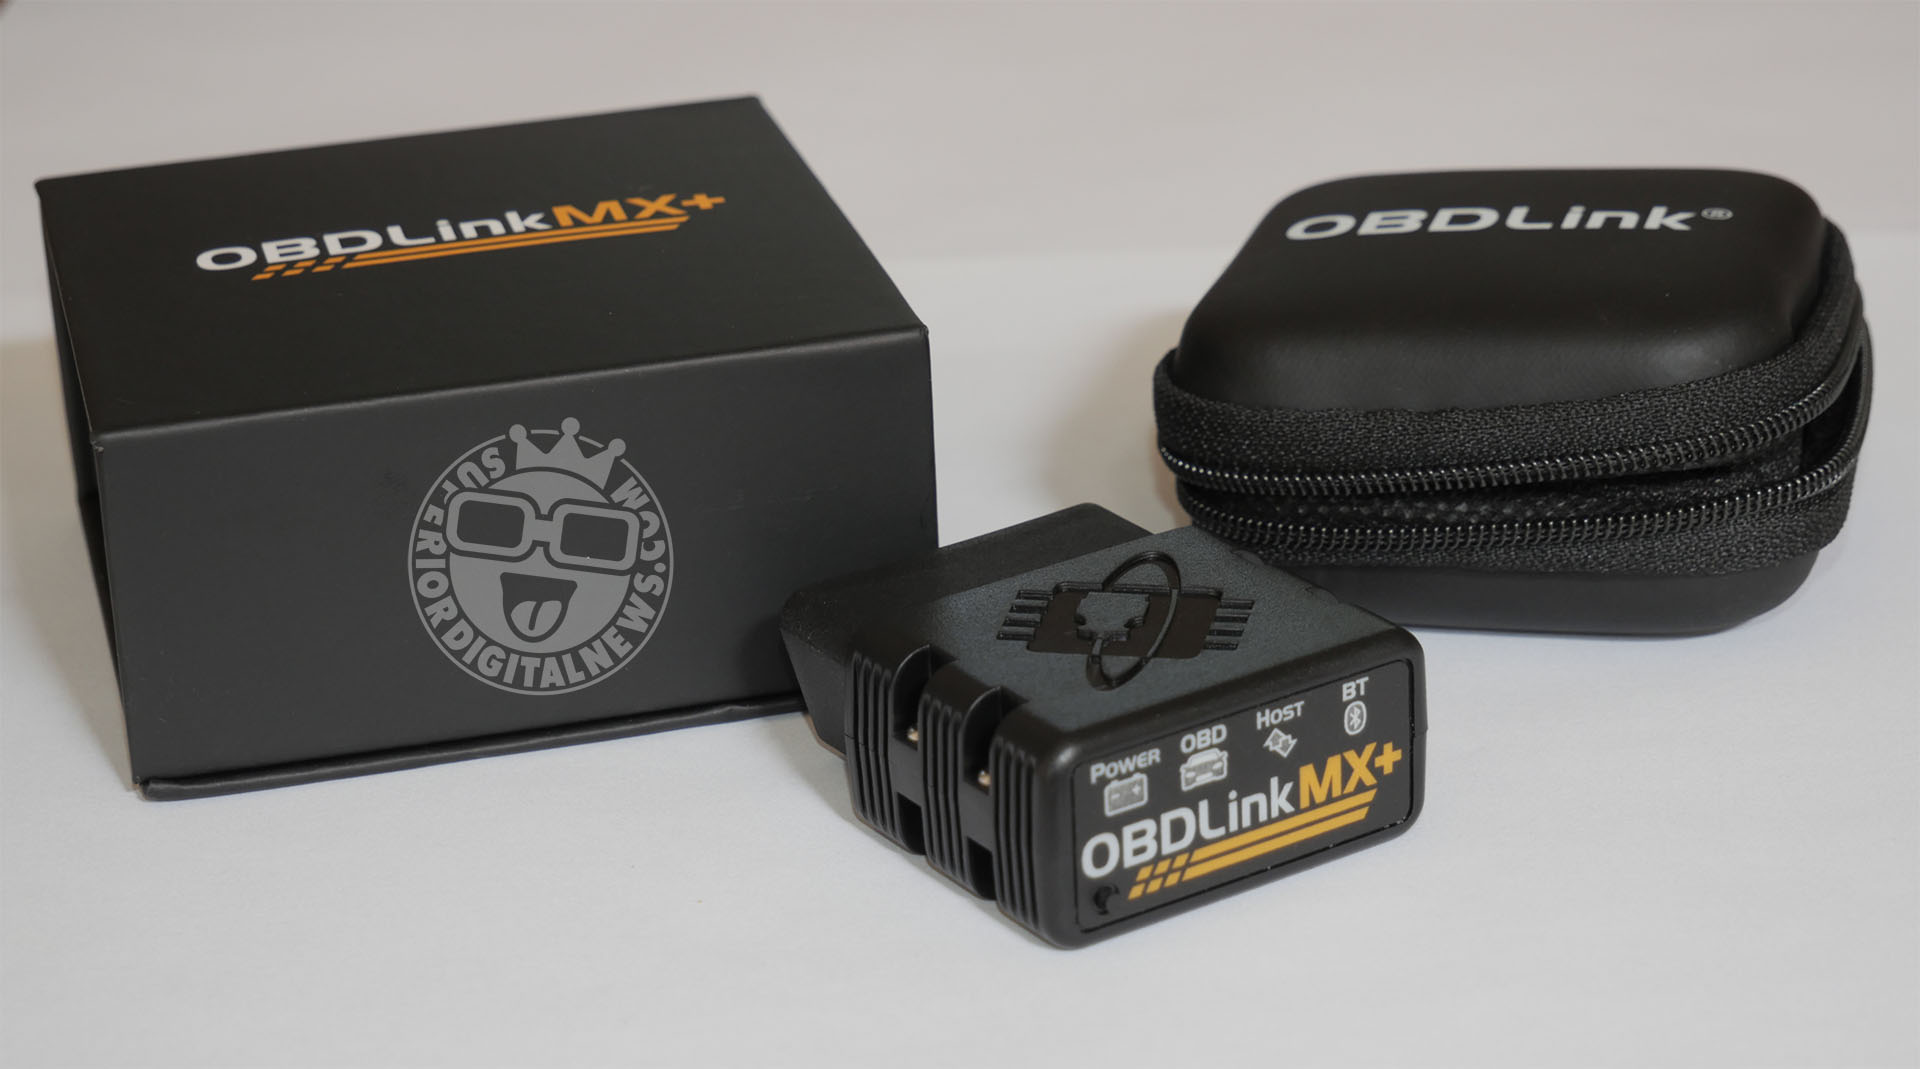 You are currently viewing OBDLink MX+ Review | #1 OBDII Code Scanner